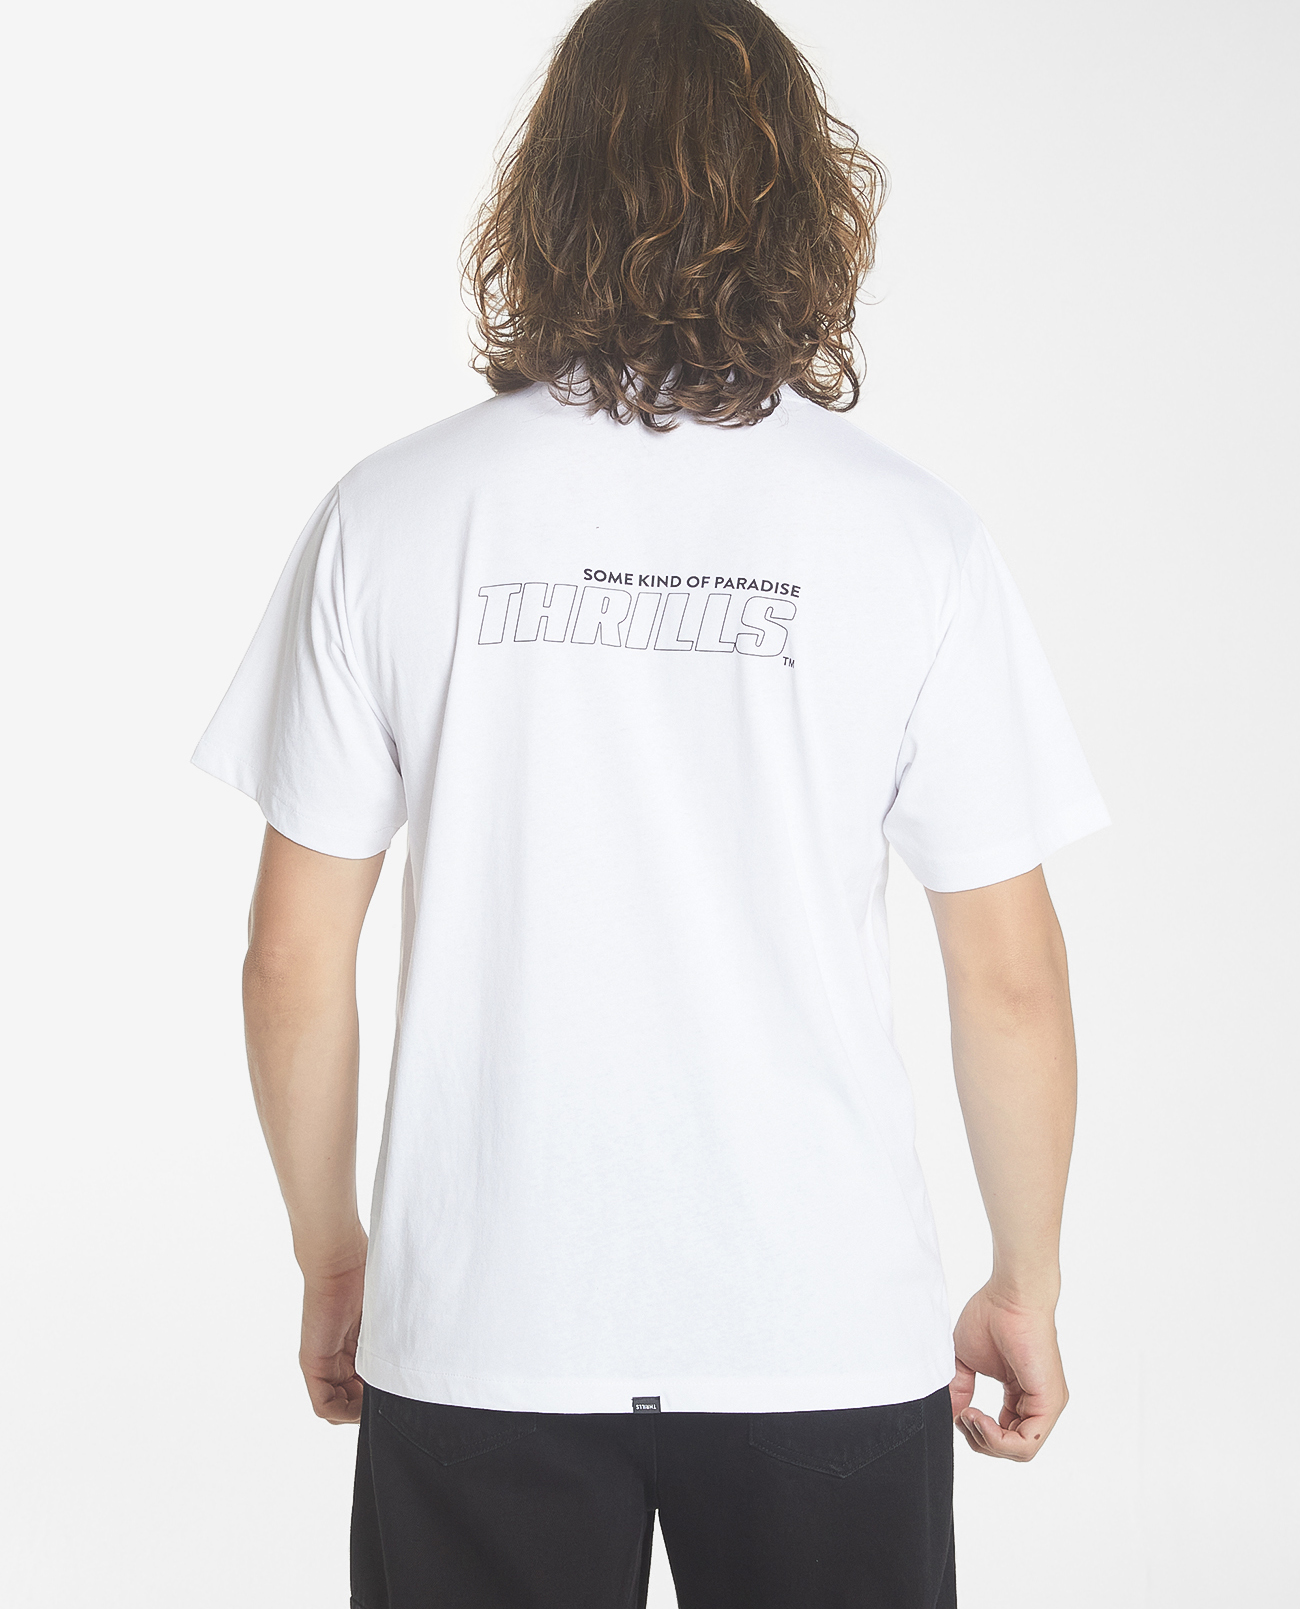 Lifted Merch Fit Tee